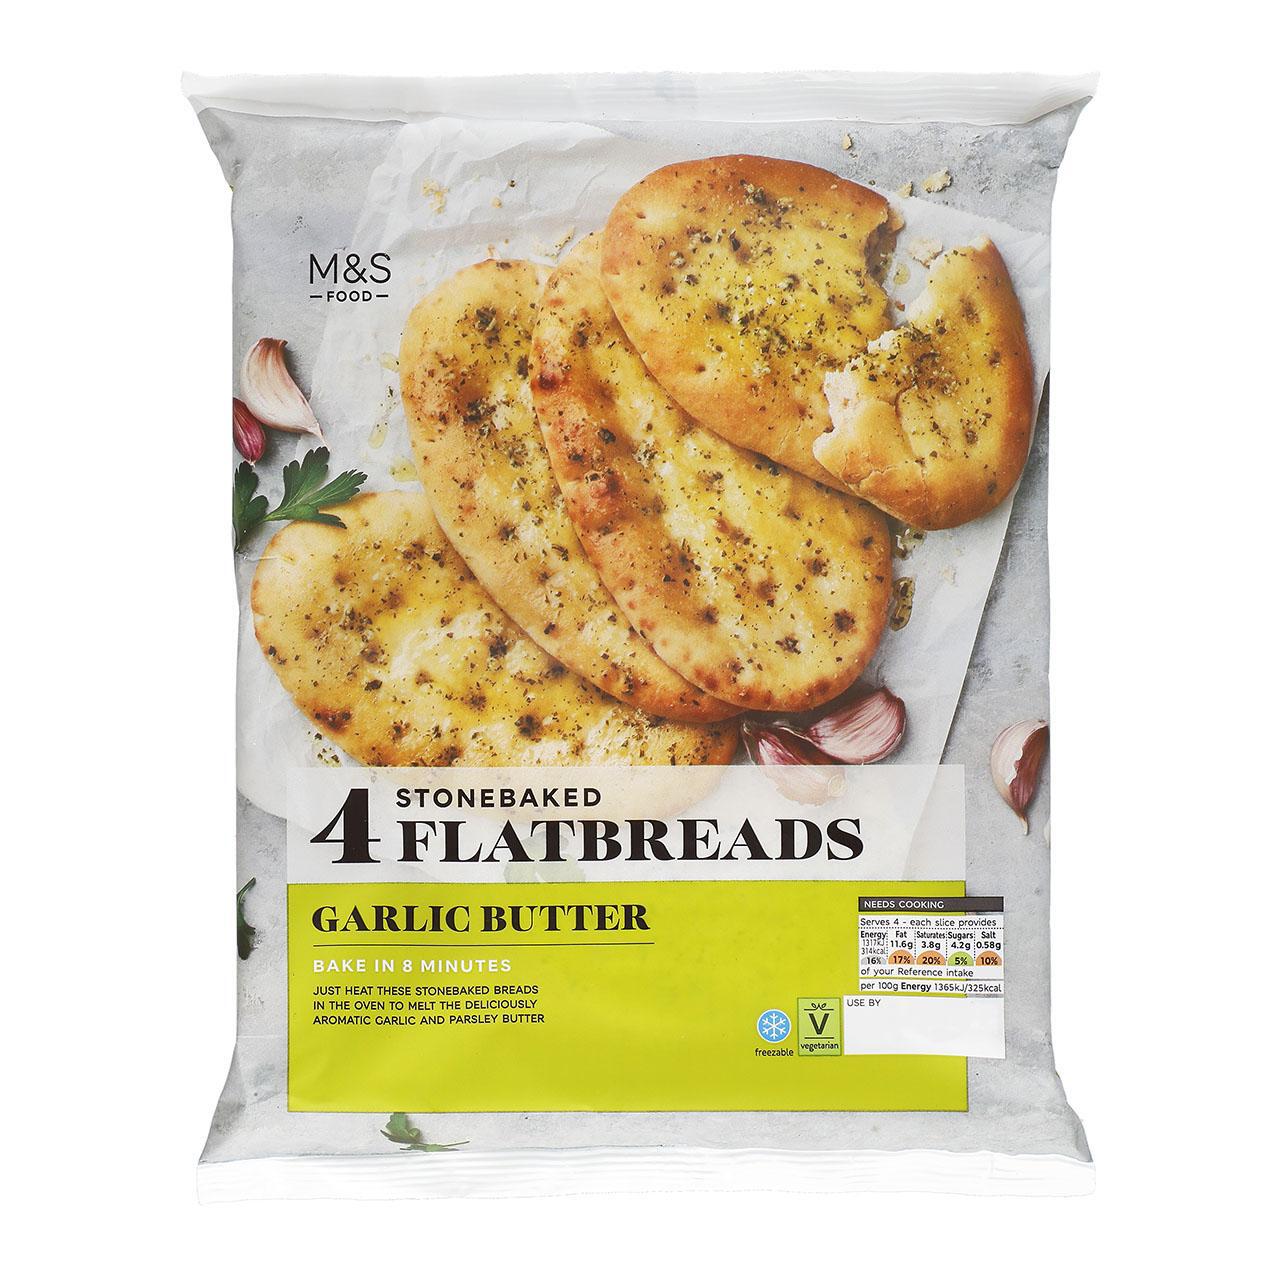 M&S Stone Baked Garlic Breads 4 per pack